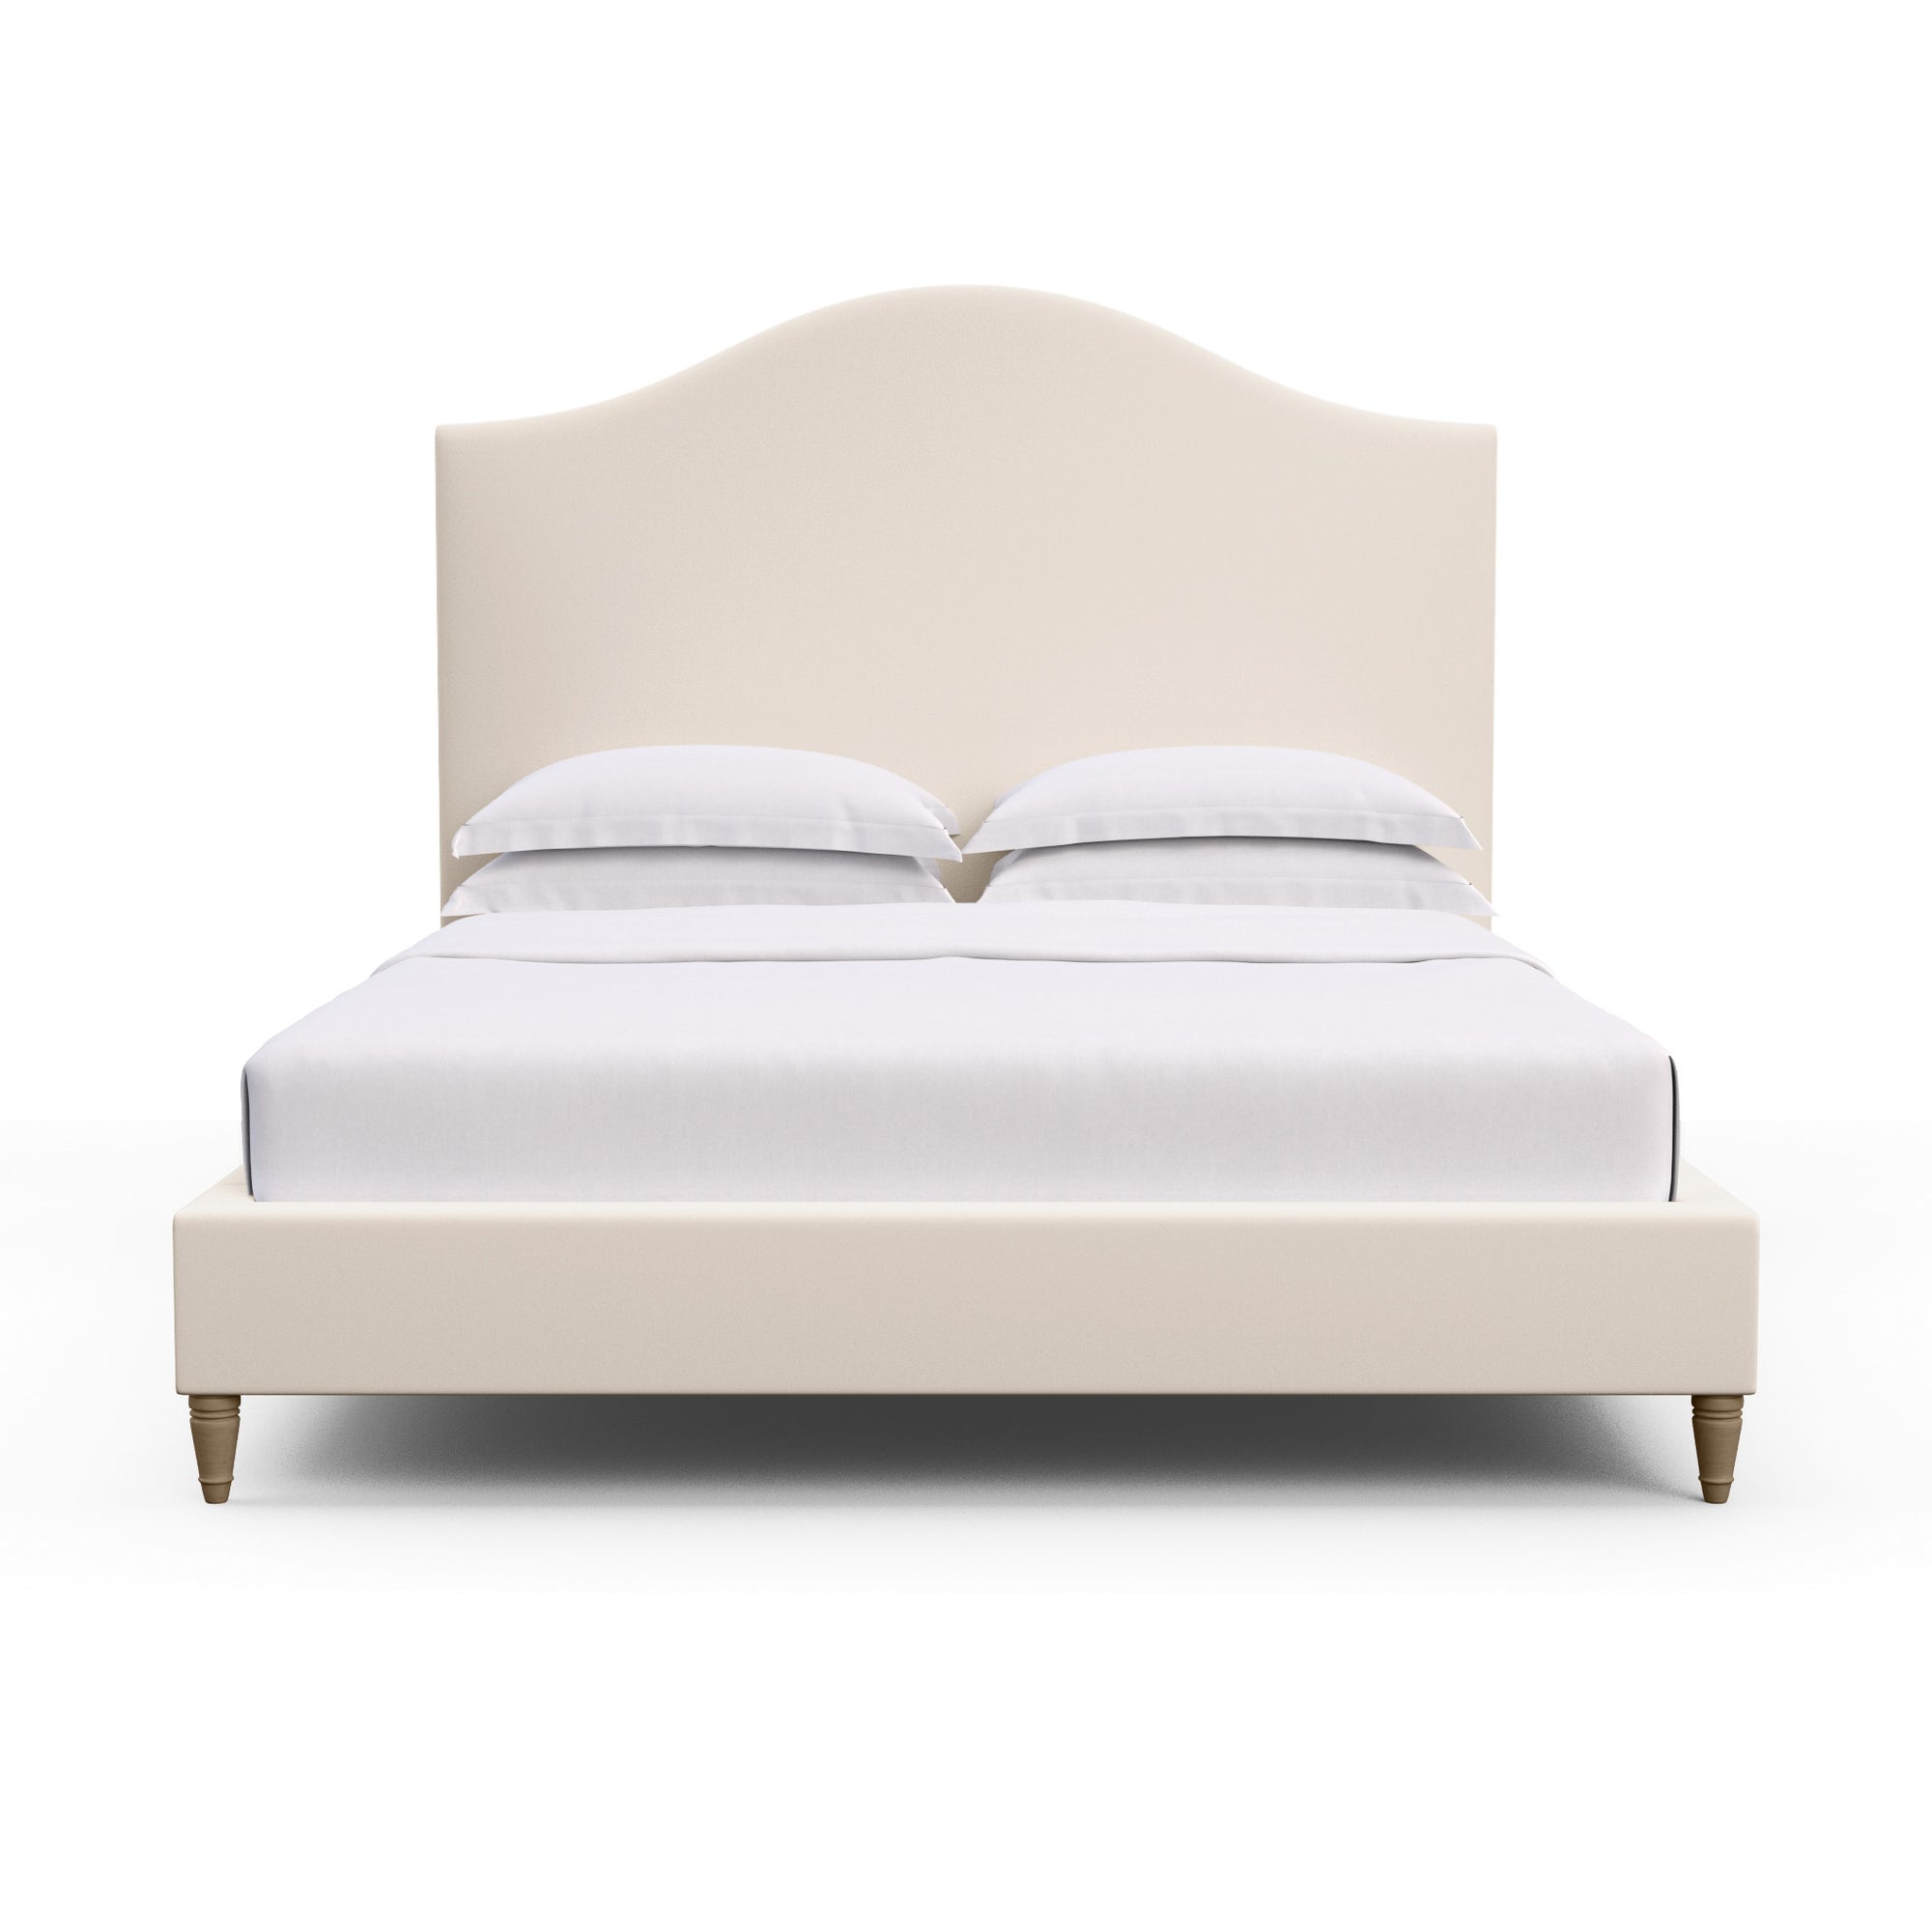 Montague Arched Panel Bed - Oyster Plush Velvet